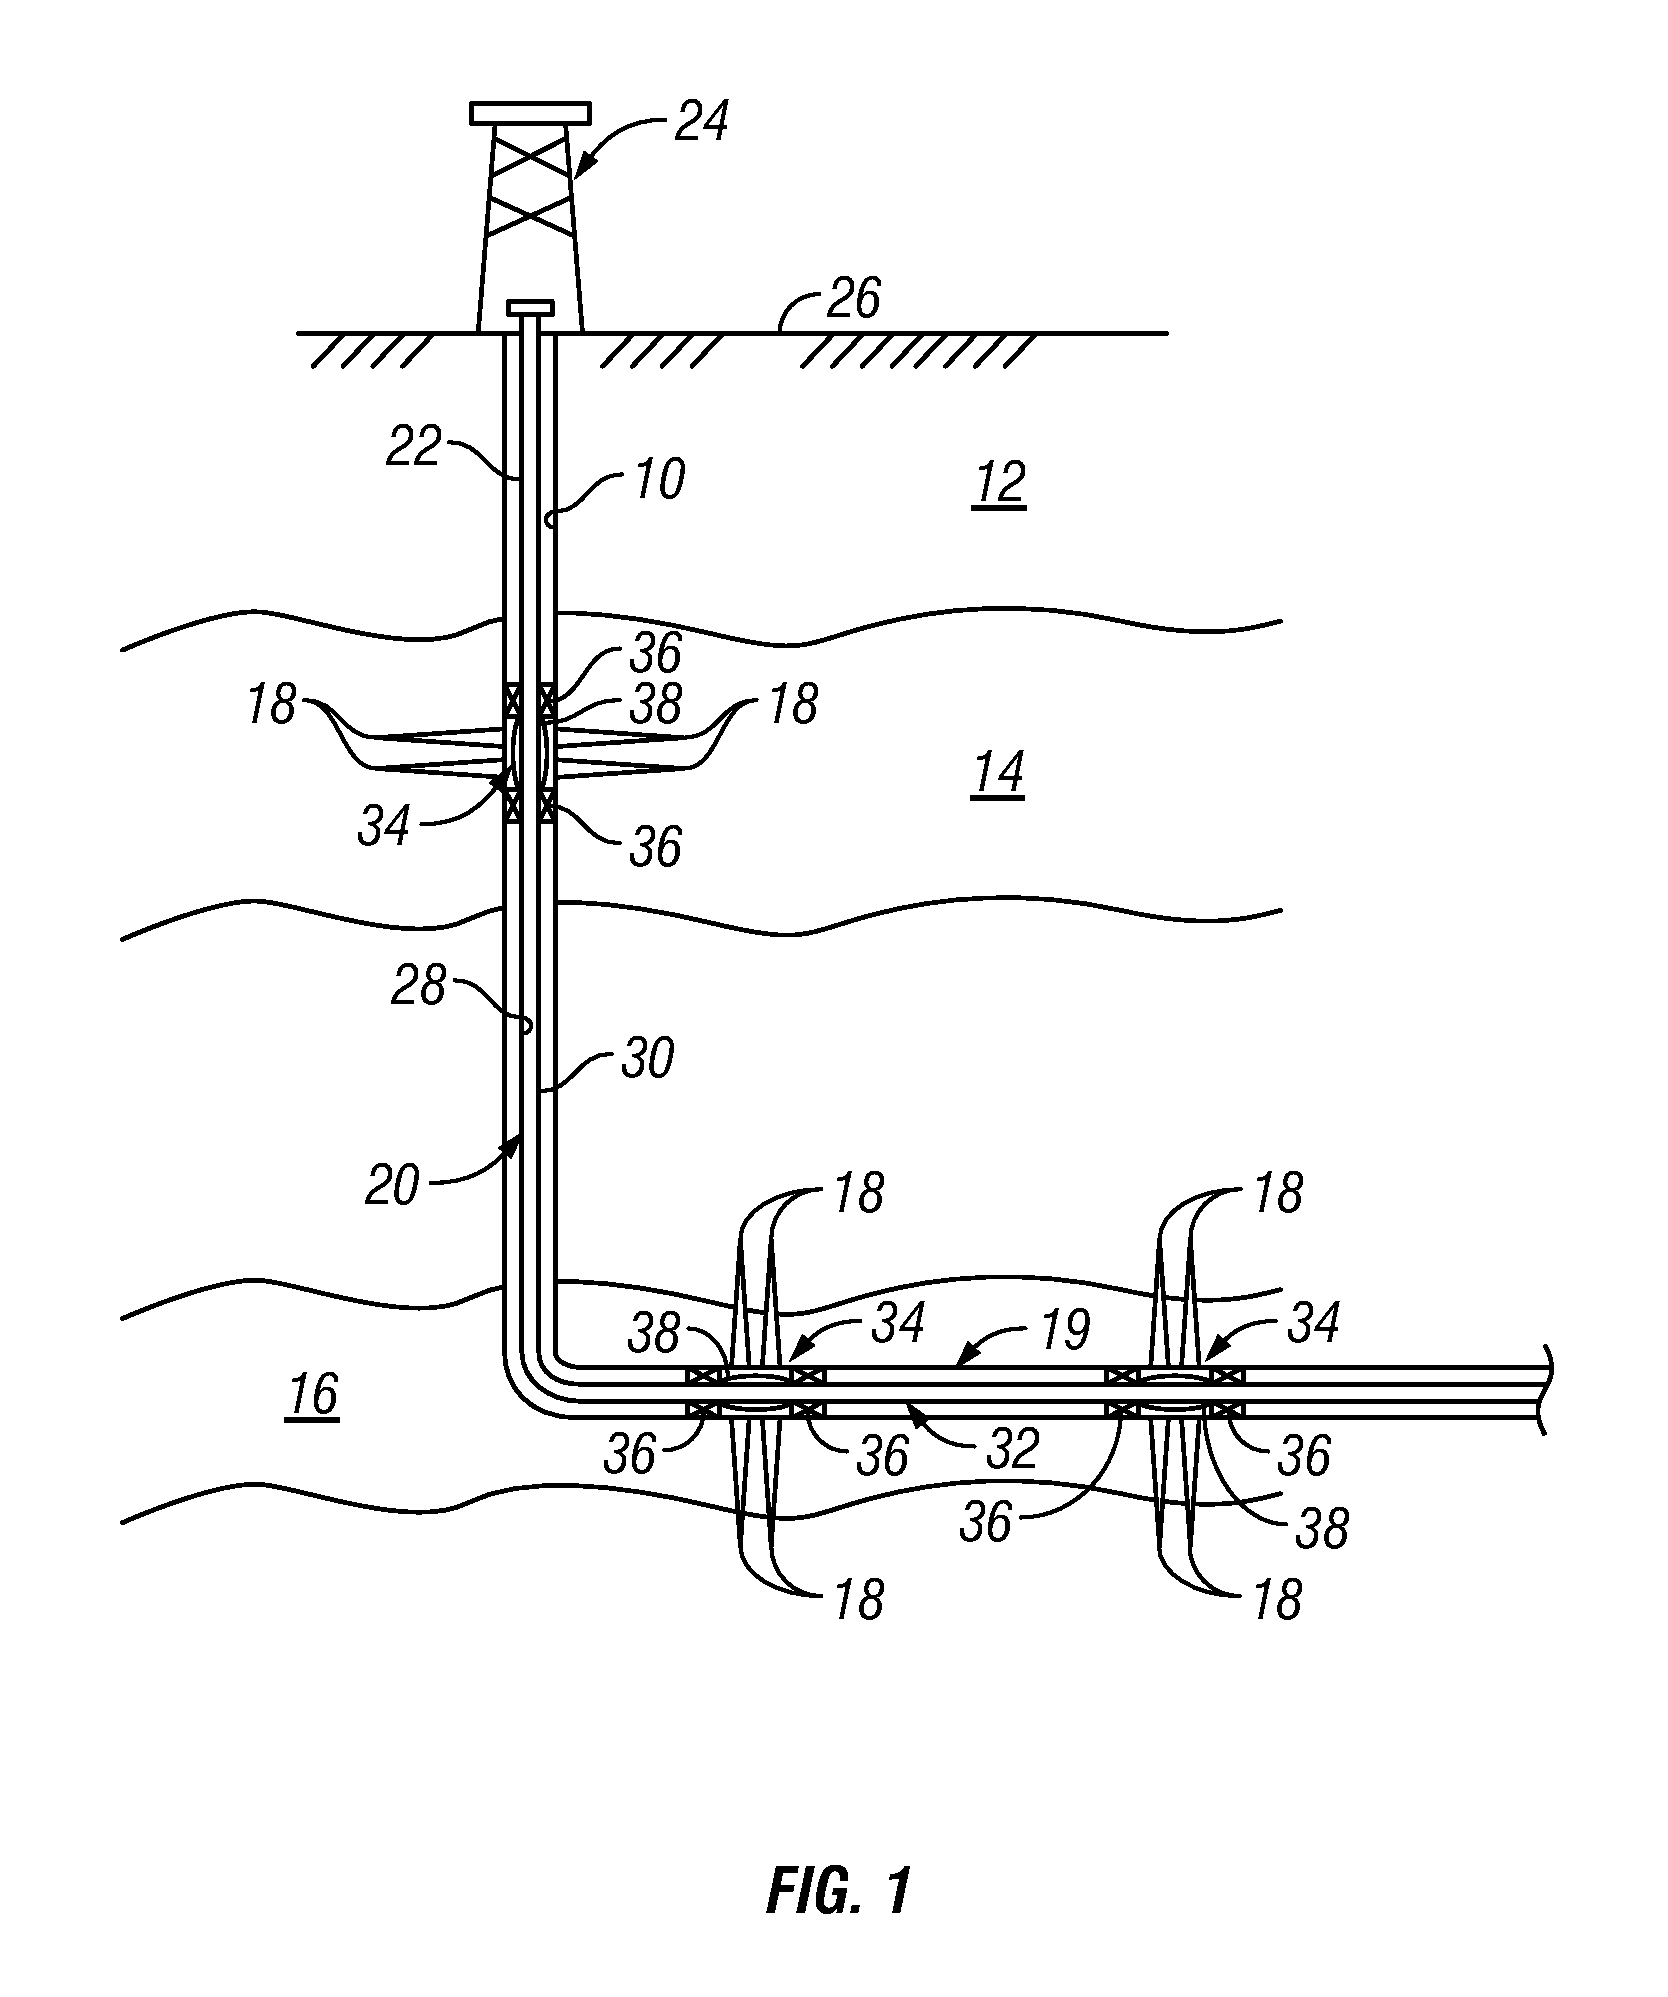 Water Sensitive Adaptive Inflow Control Using Couette Flow To Actuate A Valve